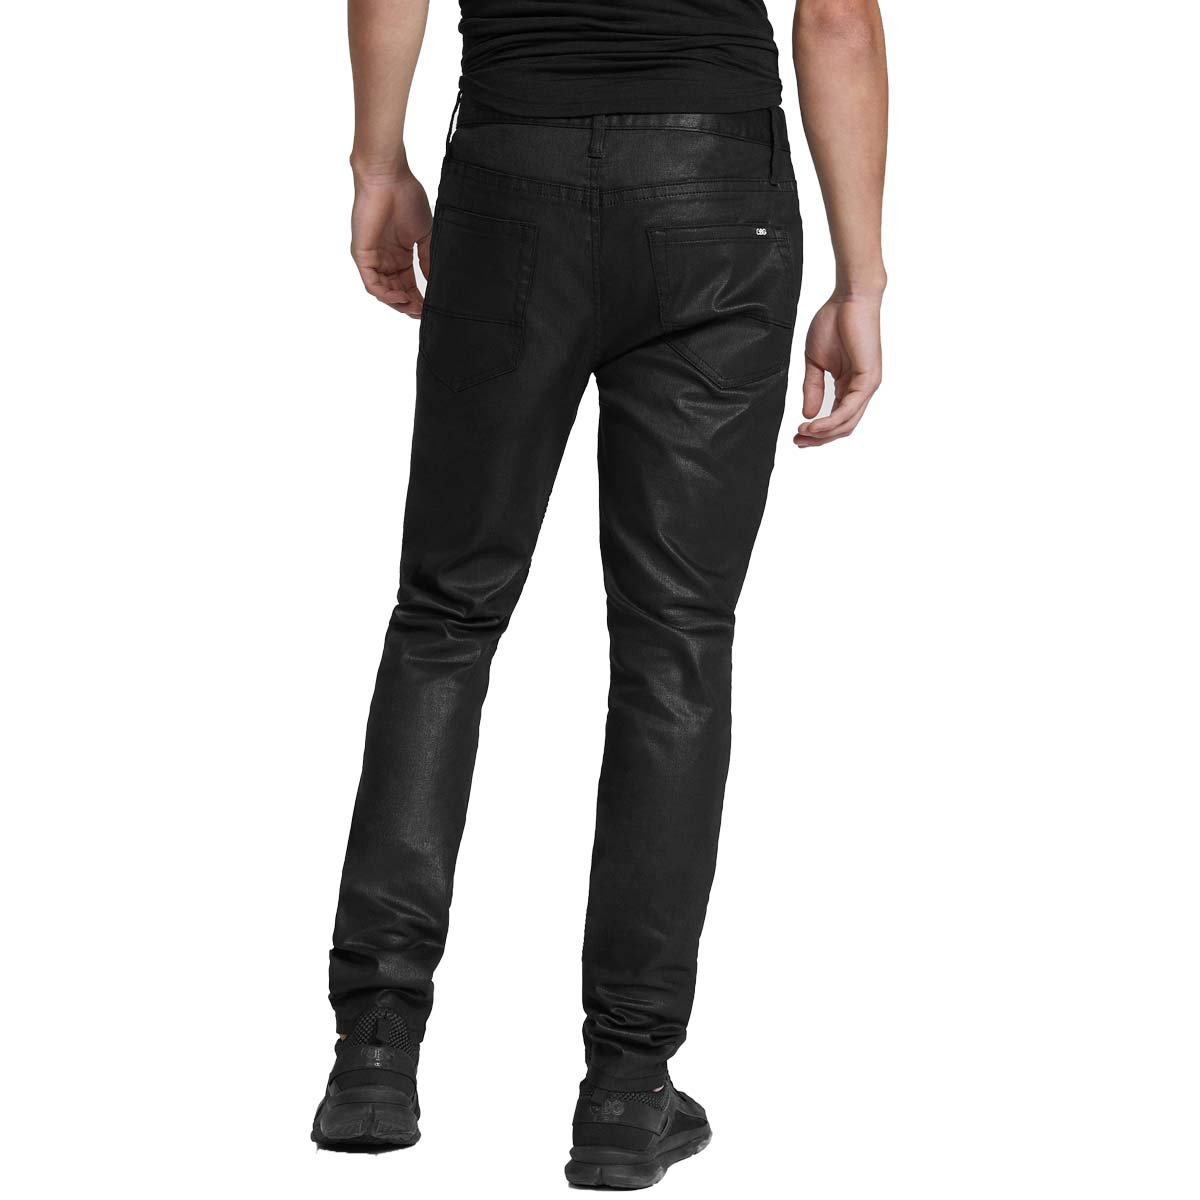 Jeans Informal Negro G By Guess para Caballero